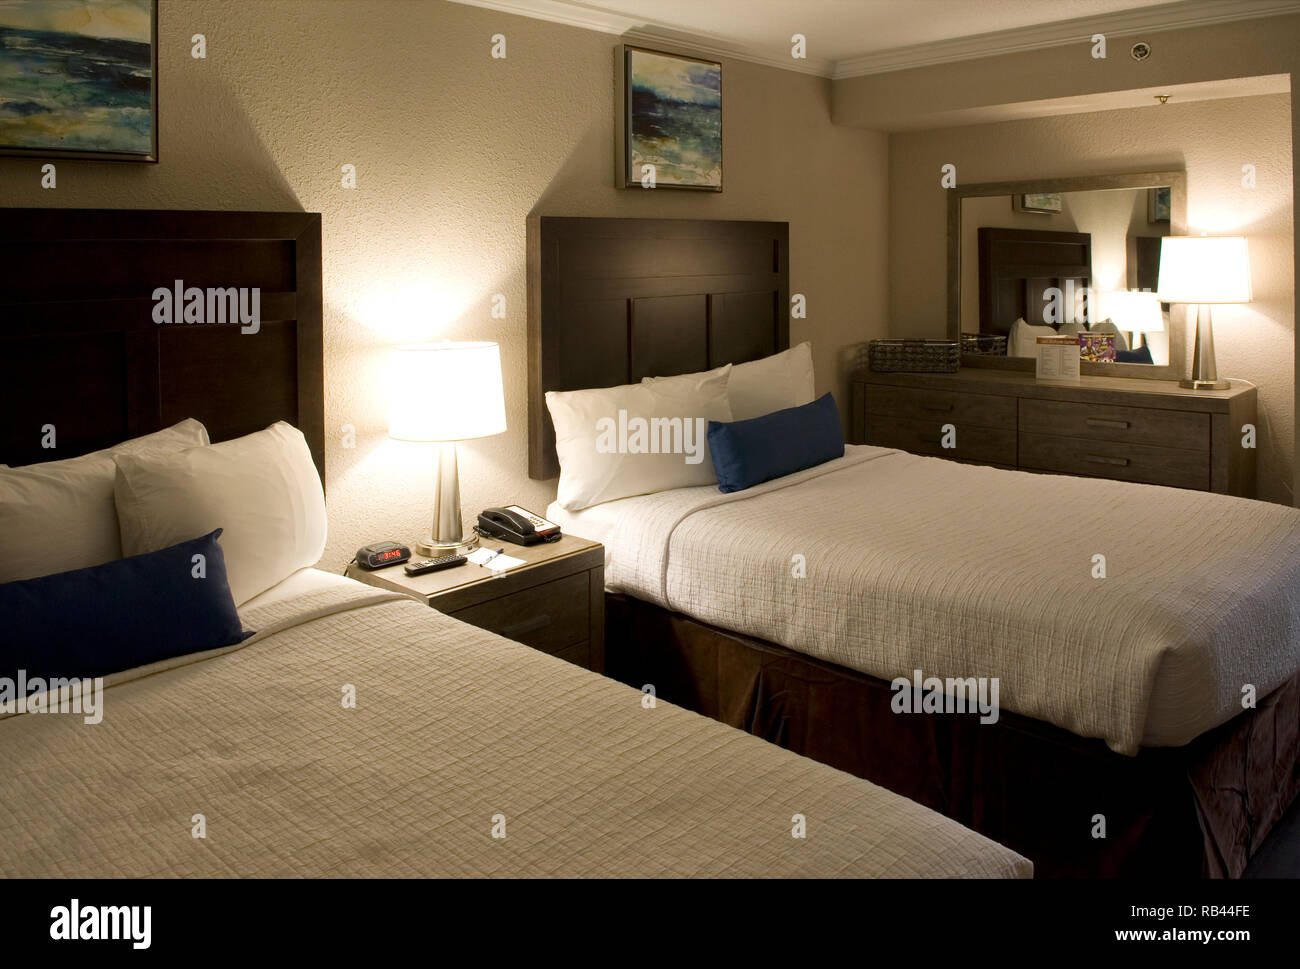 Double beds in hotel room, USA. Stock Photo